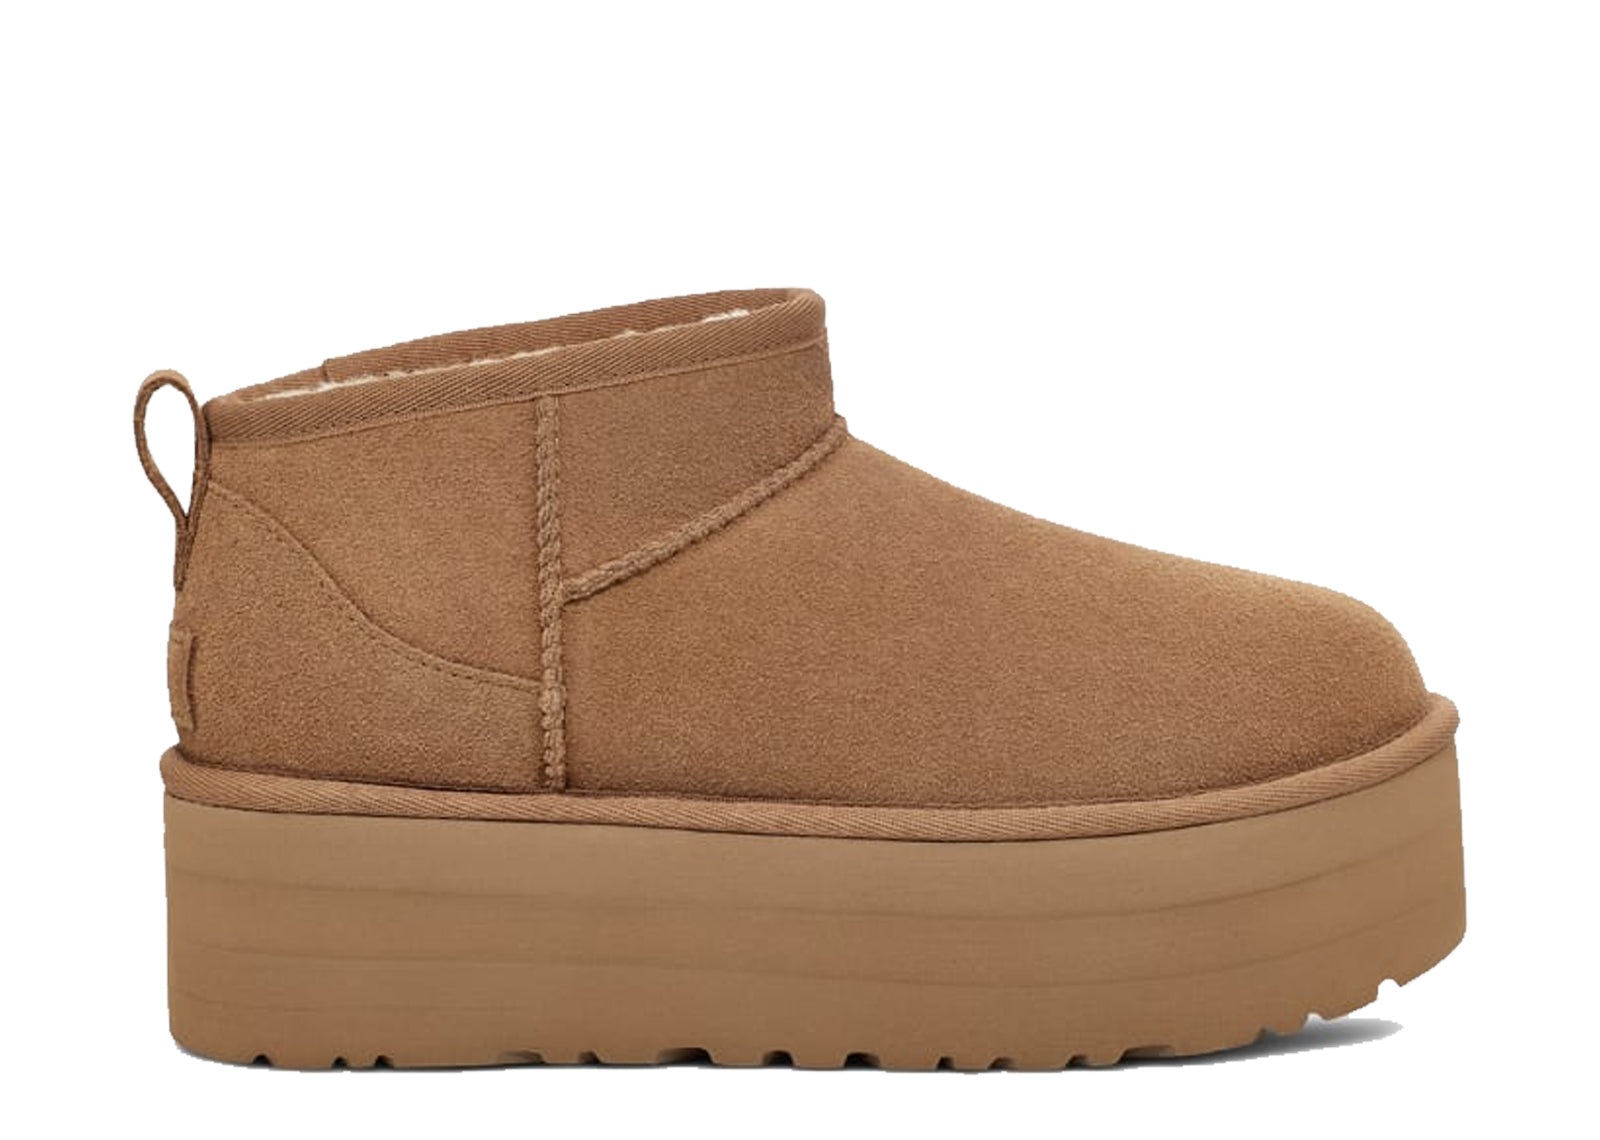 UGG – The Hype